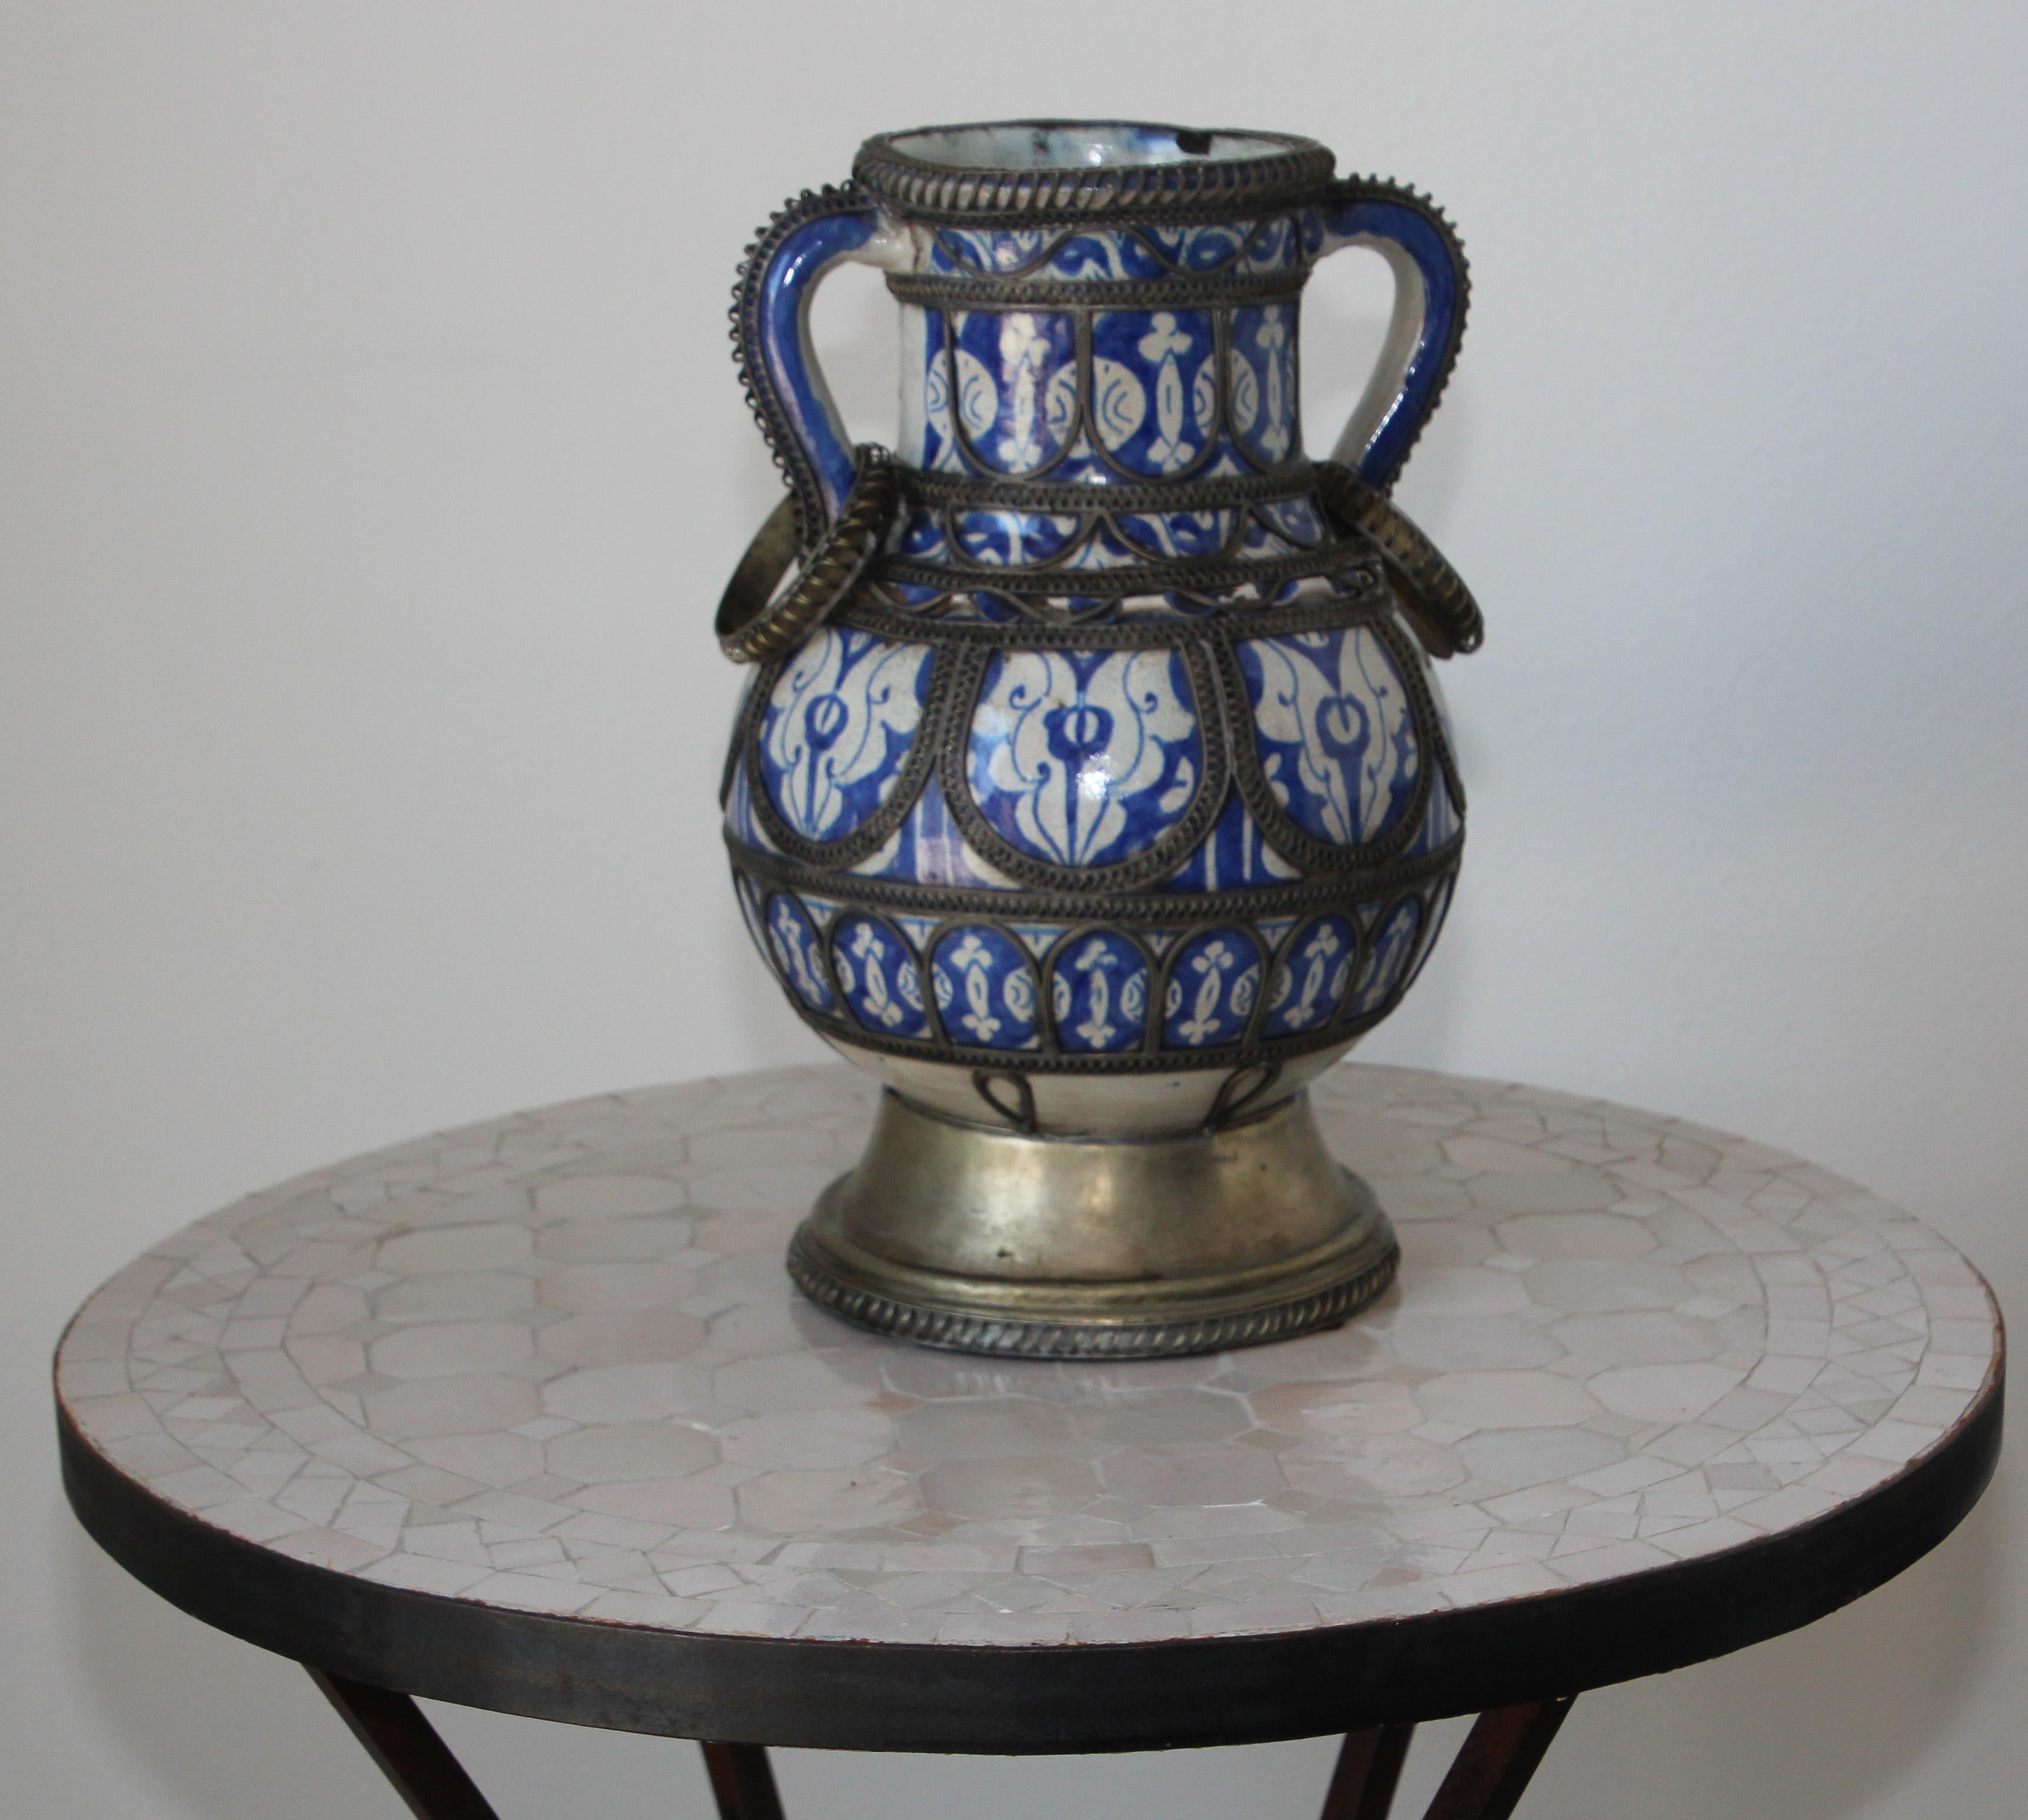  Moroccan Blue & White Ceramic Footed Vase from Fez with Silver Filigree For Sale 2